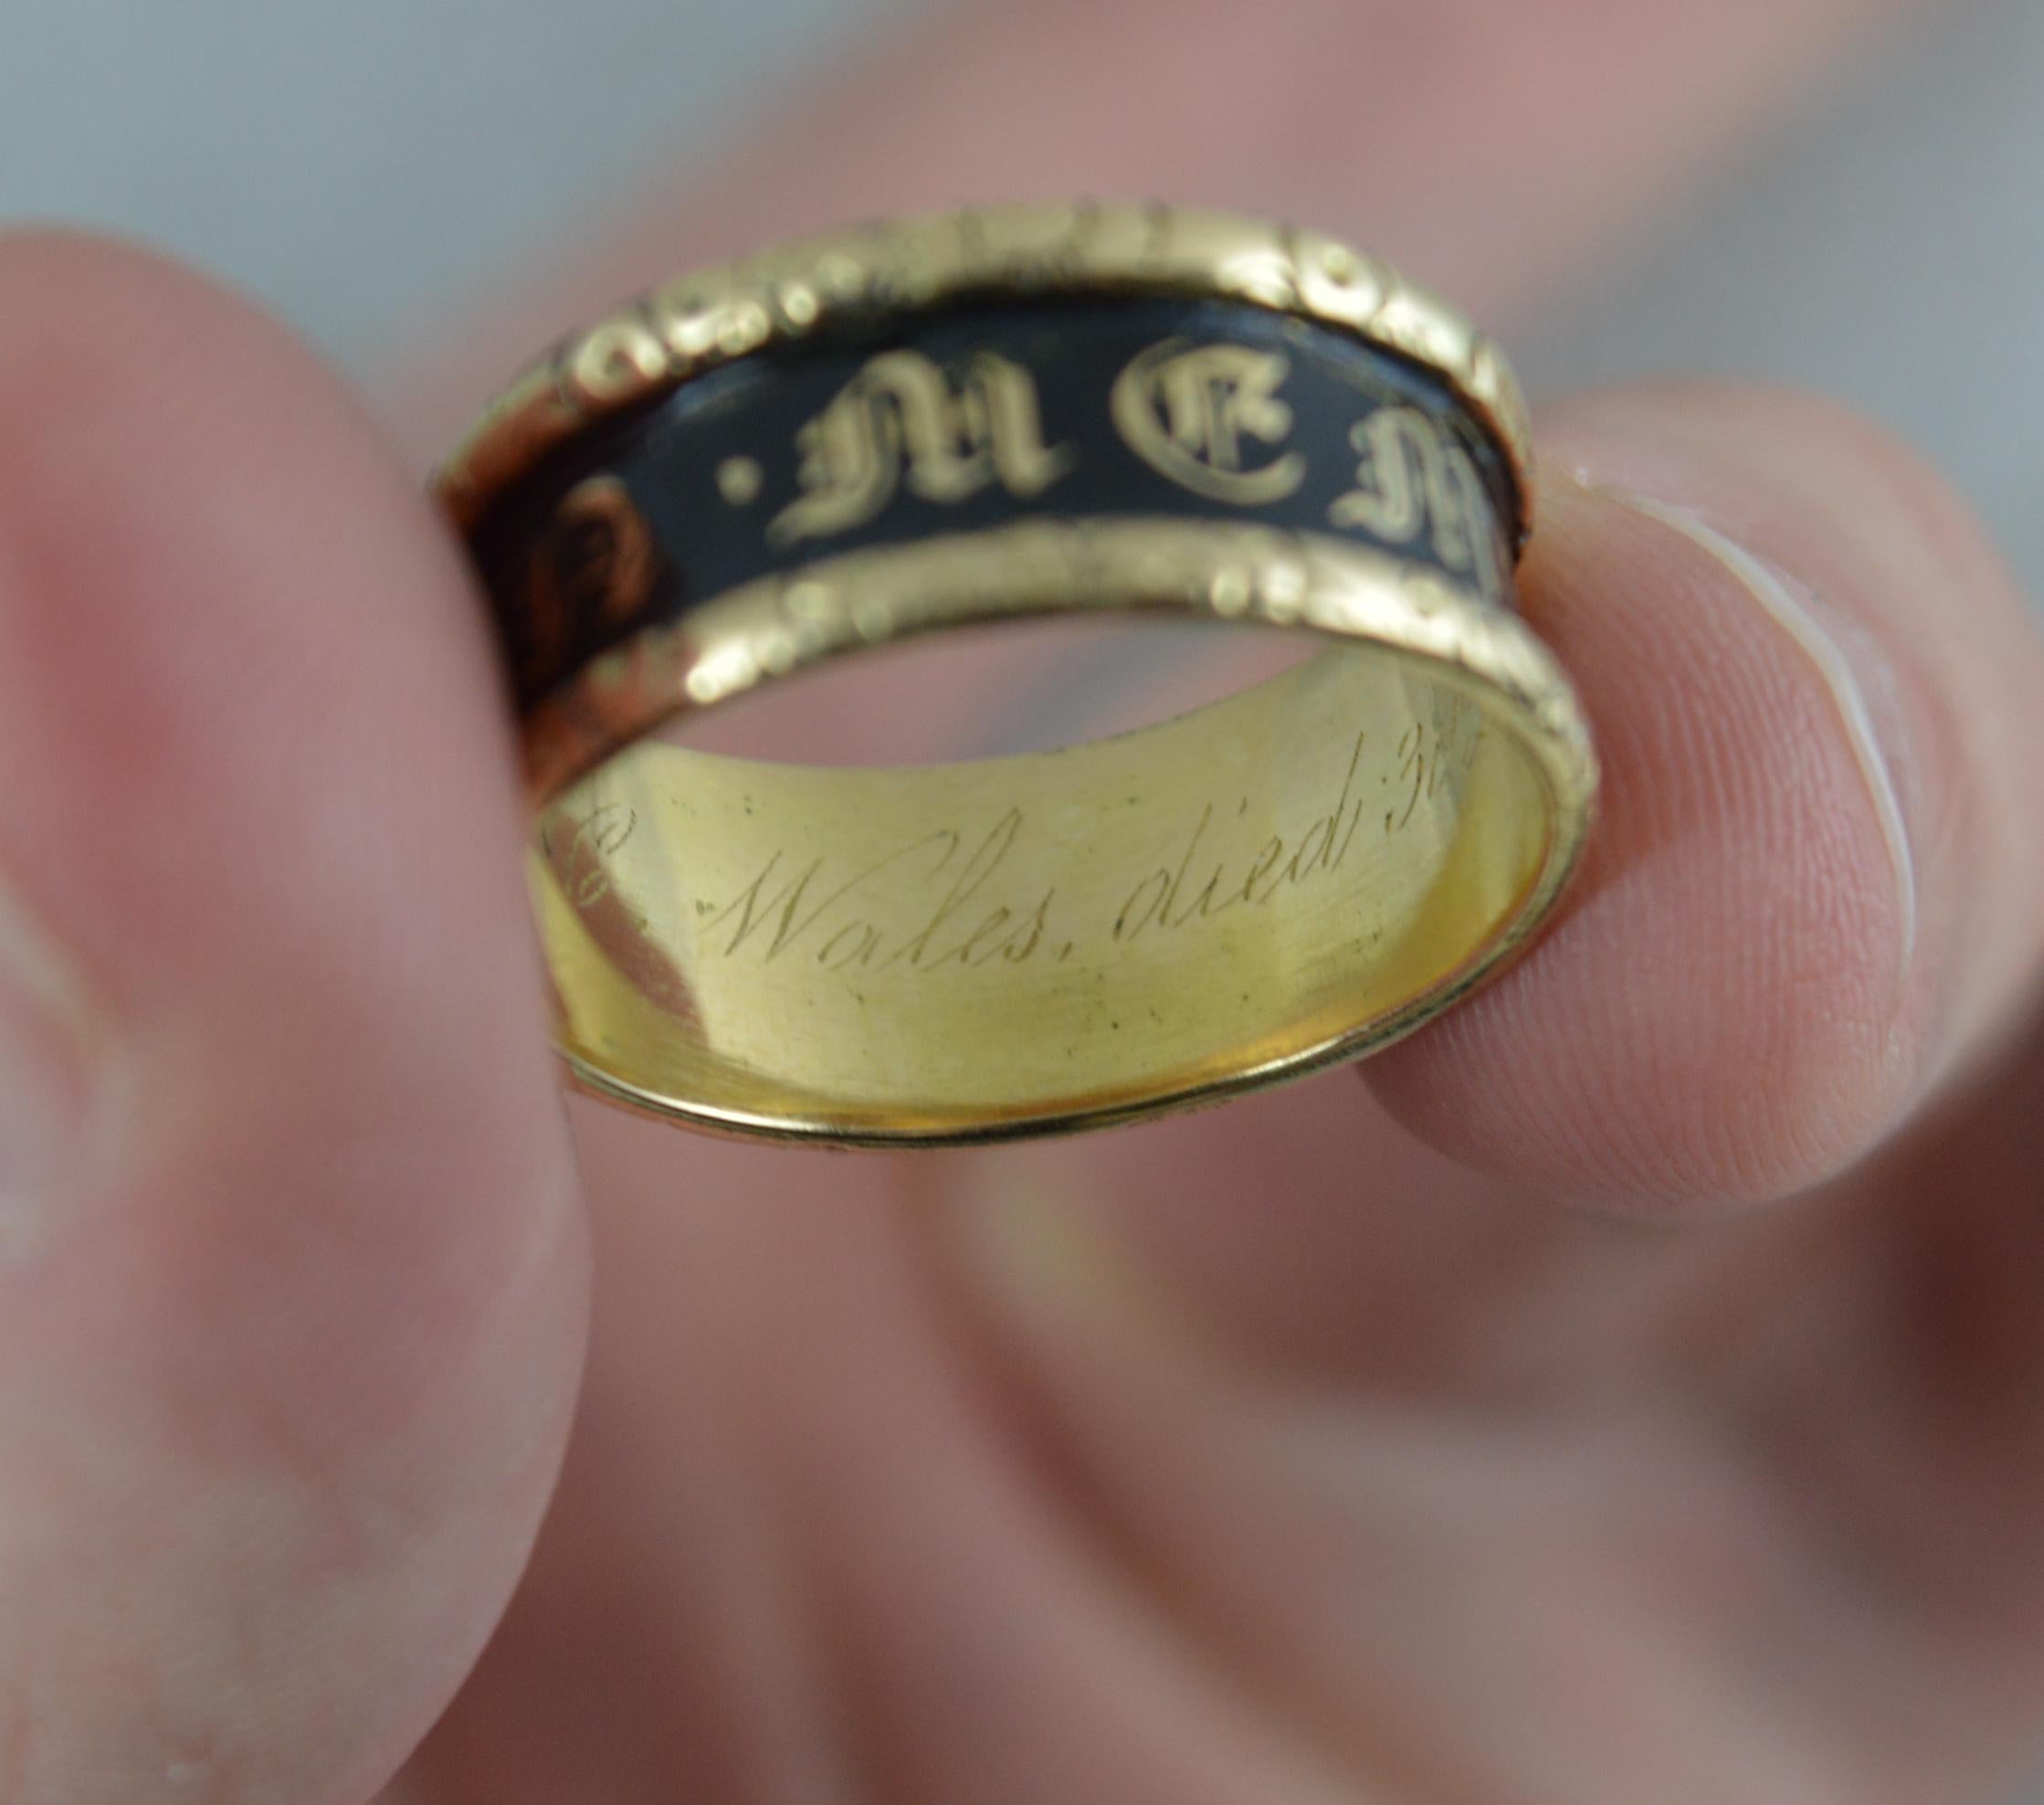 Women's or Men's 1824 William IV 18 Carat Gold and Enamel in Memory of Mourning Band Ring